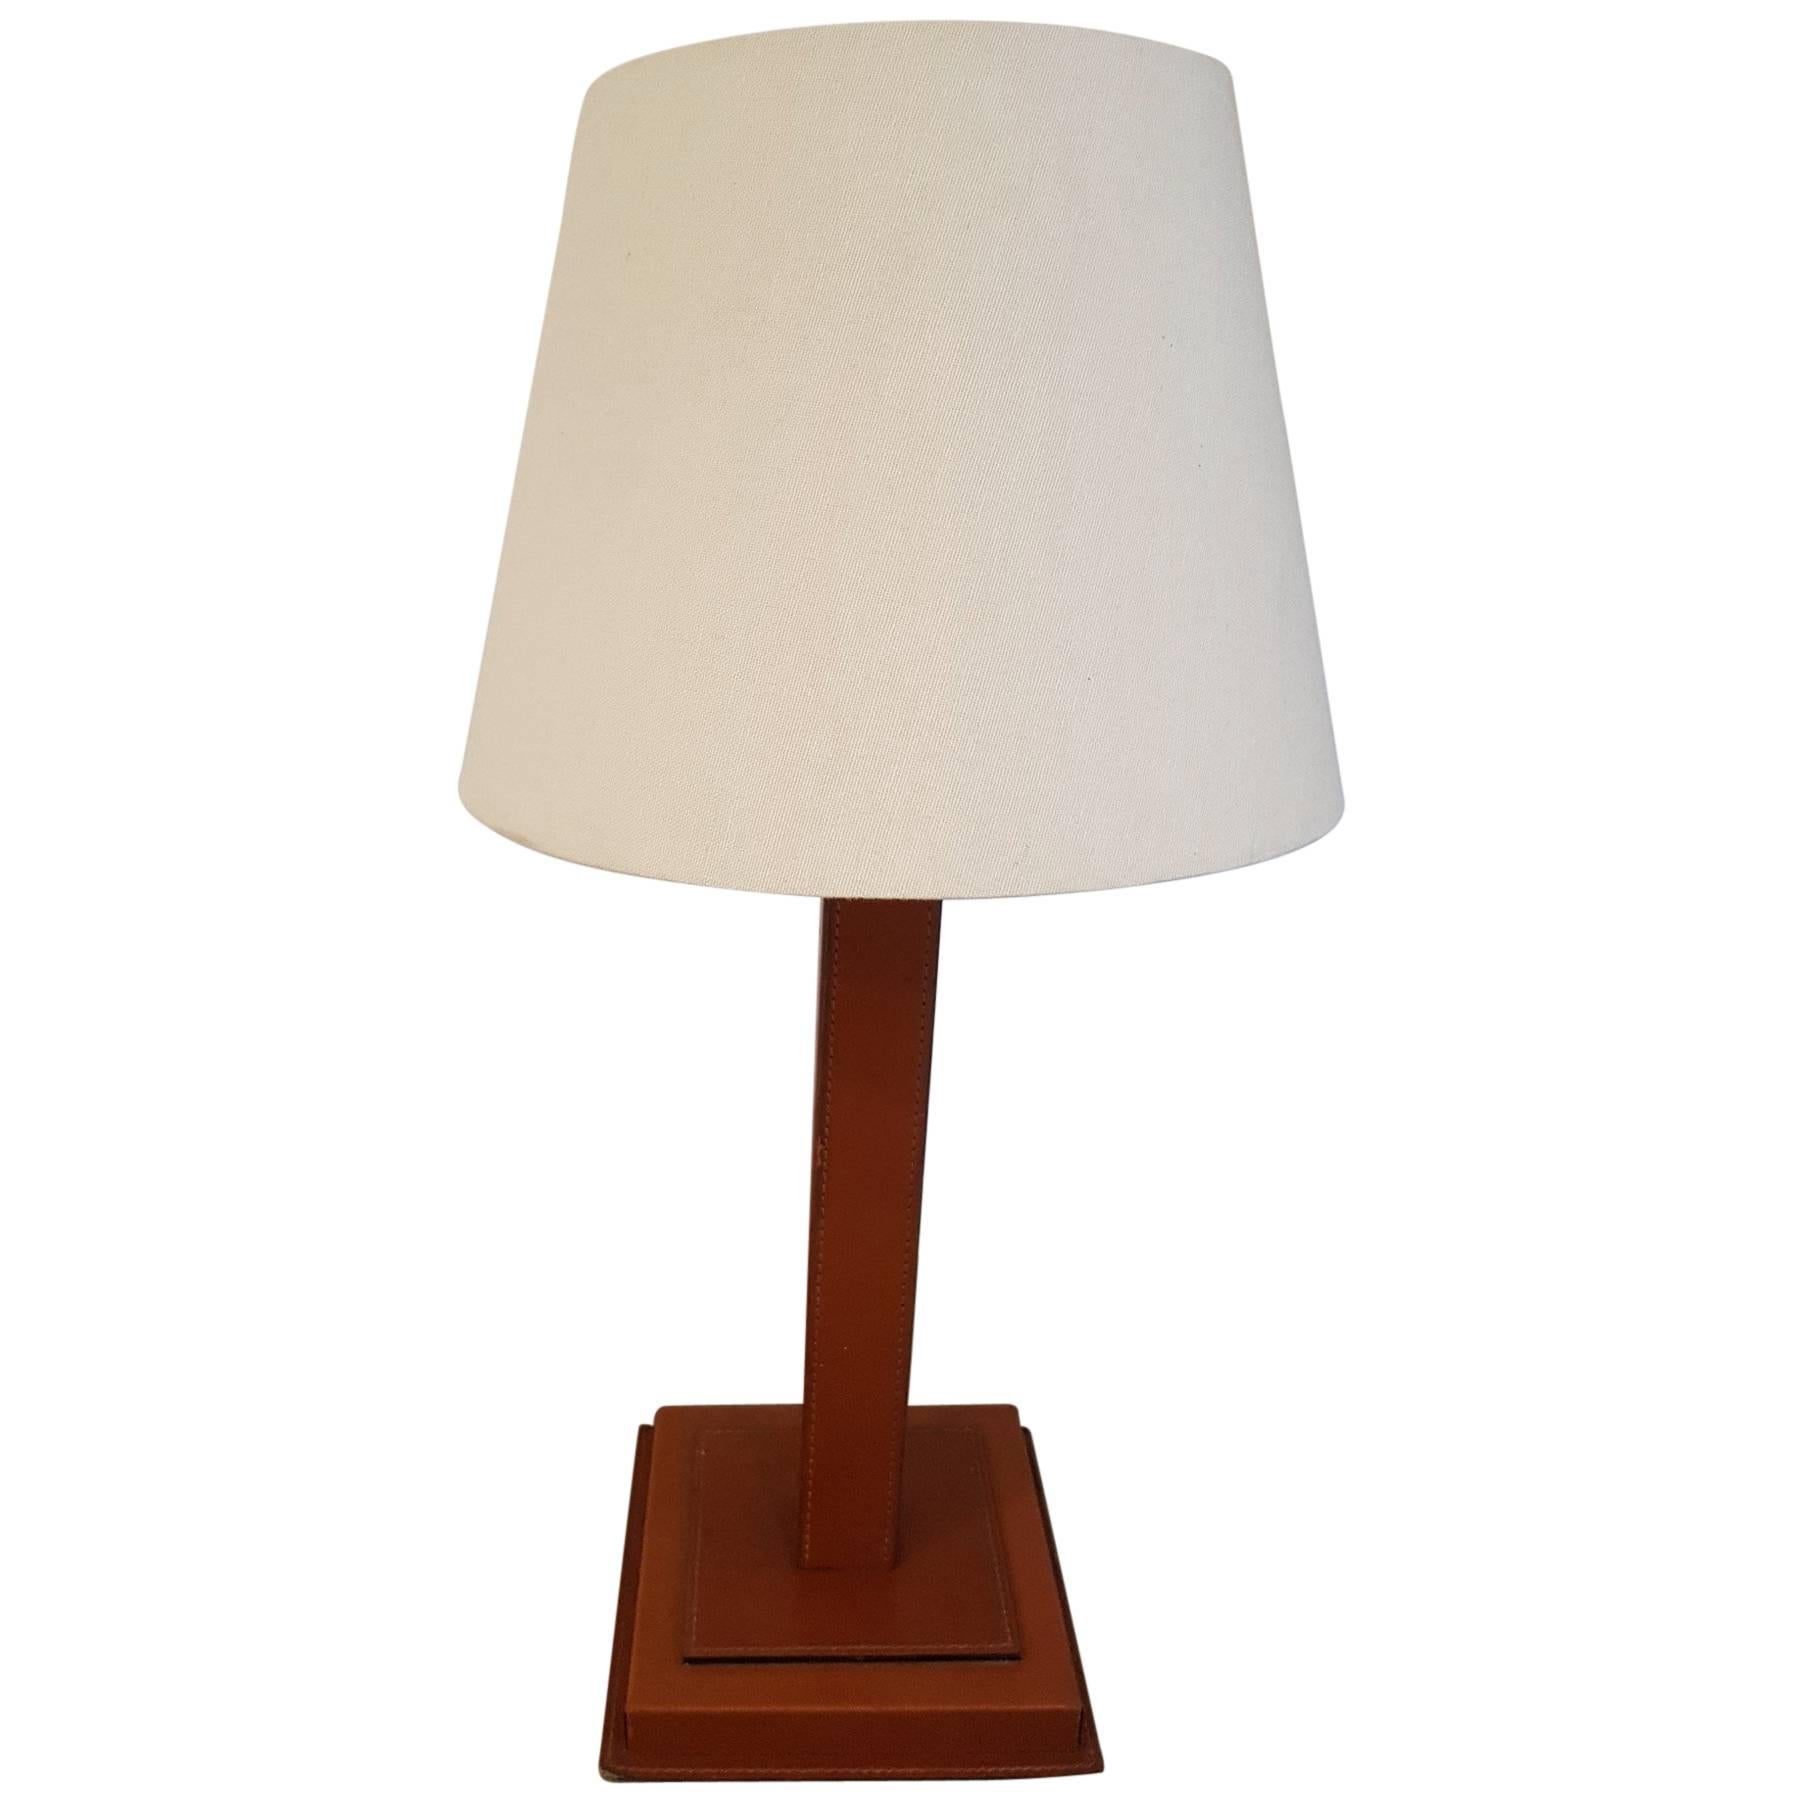 French Tan Leather Table Lamp